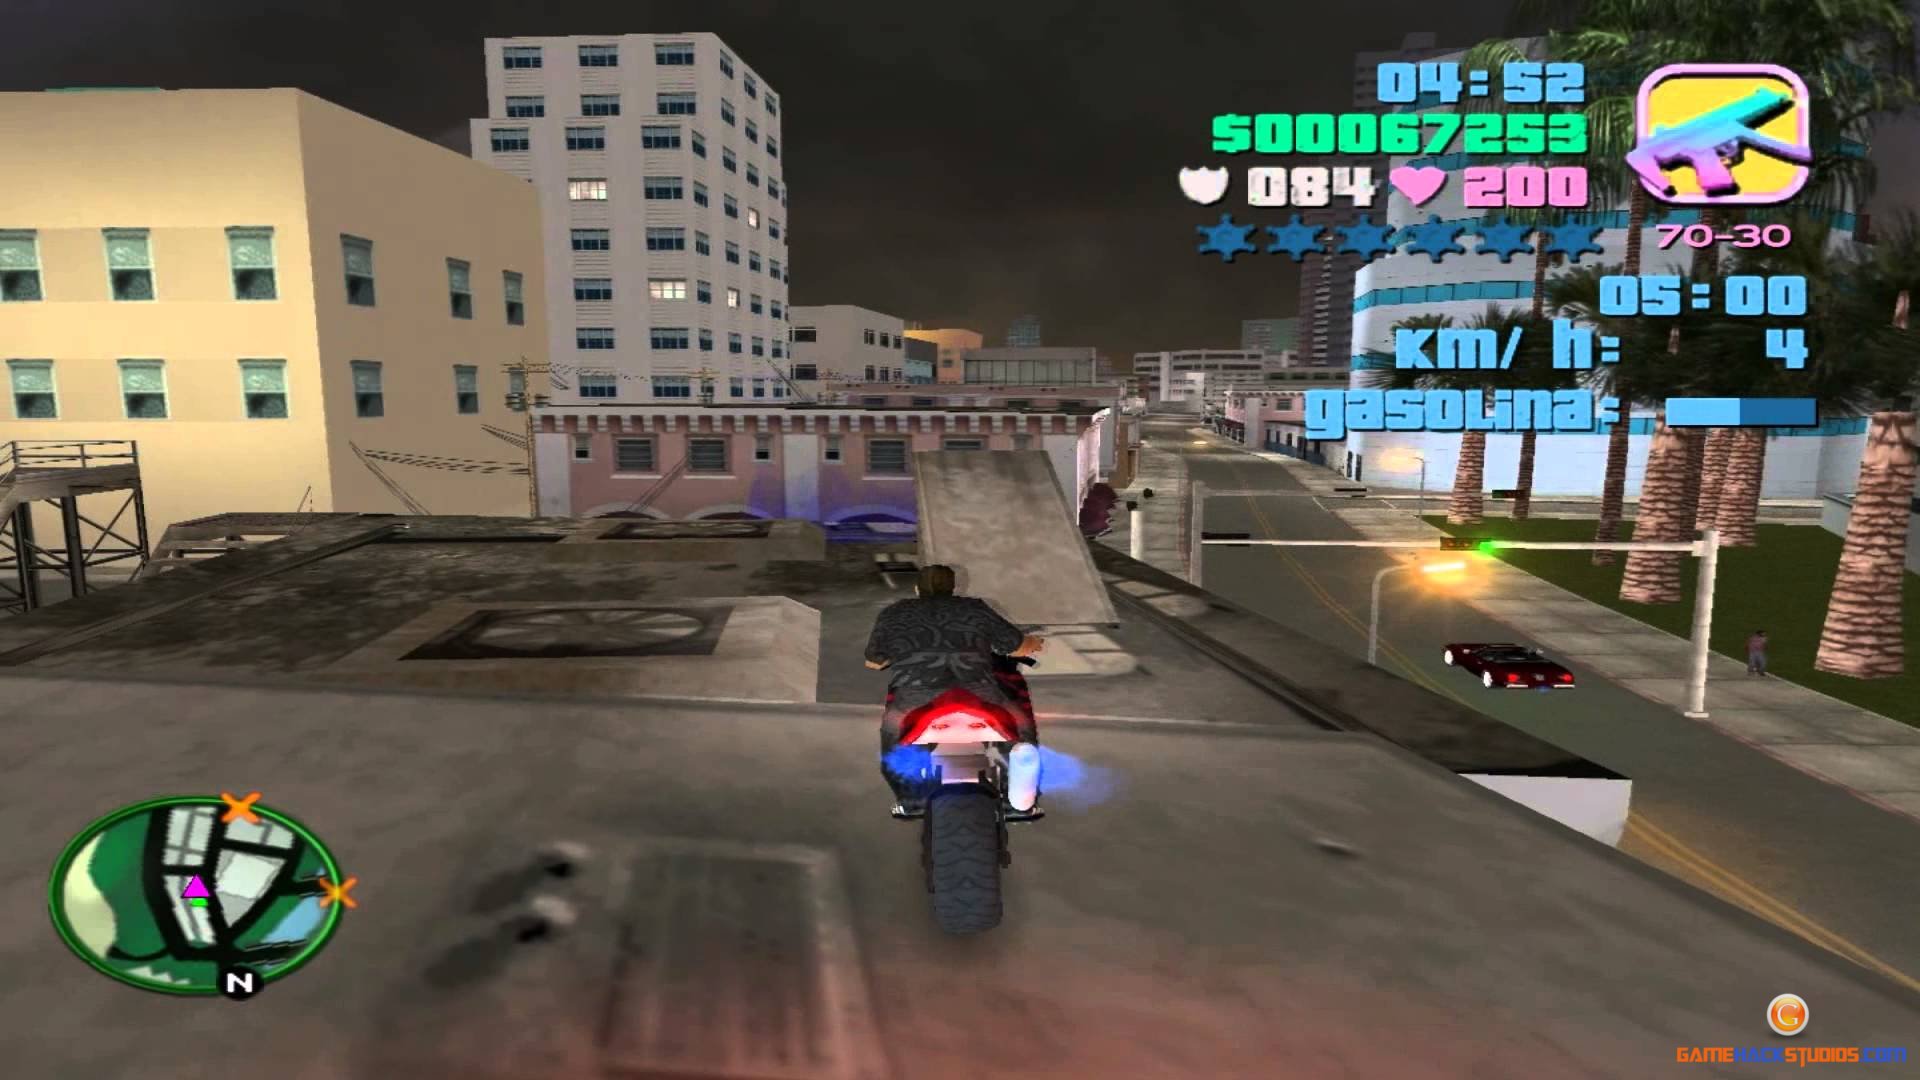 Y city game free download torrent full